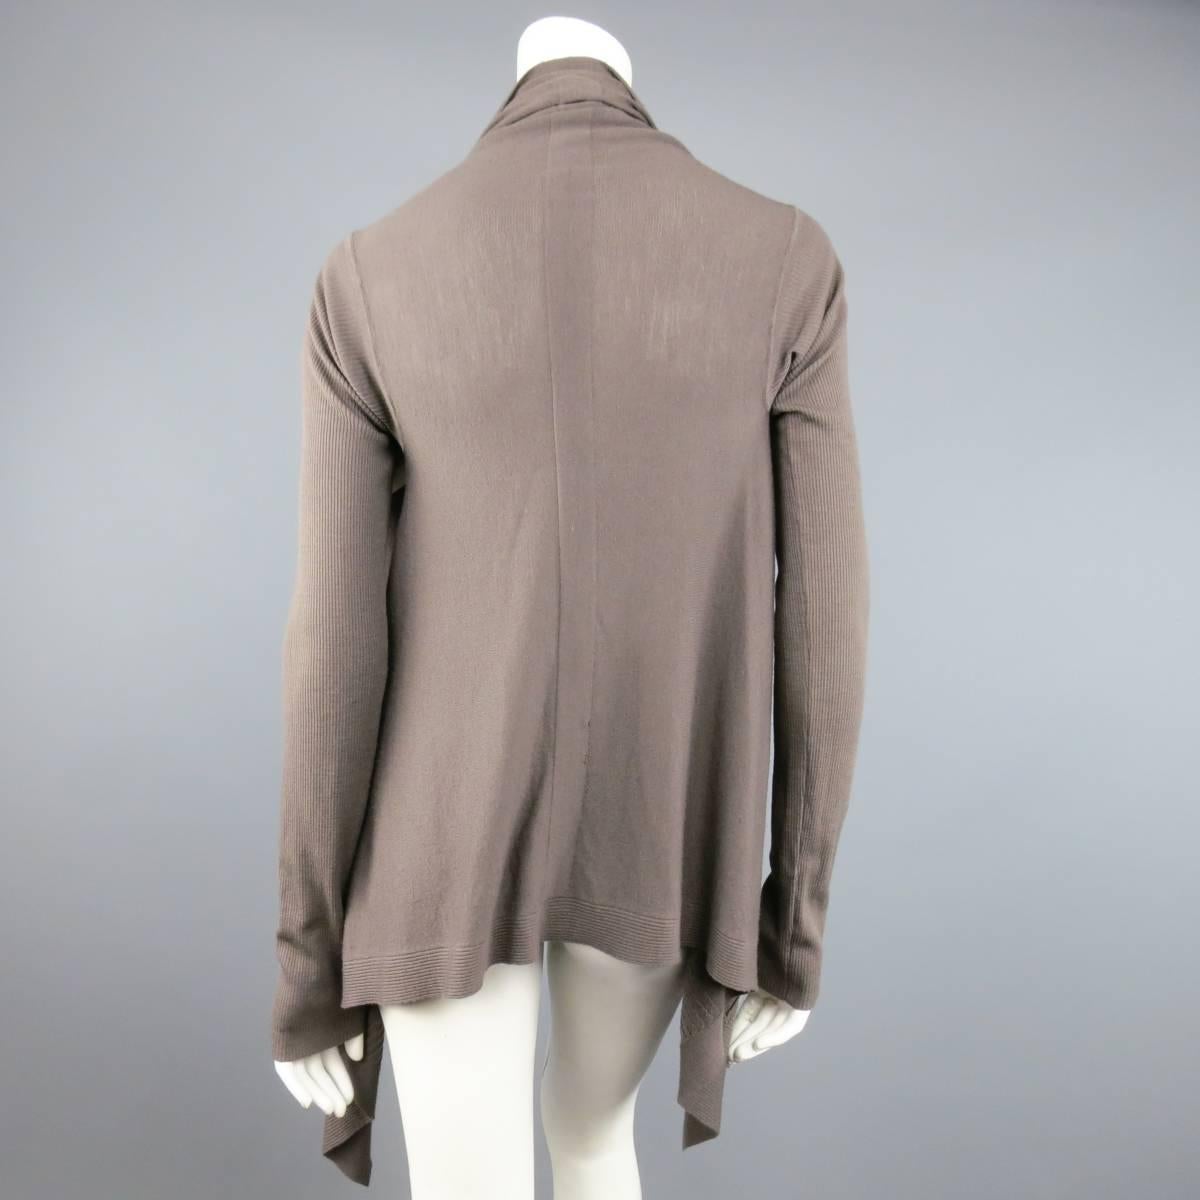 RICK OWENS Cardigan - Women's 2013 - Size S Taupe Ribbed Sleeve Draped 2